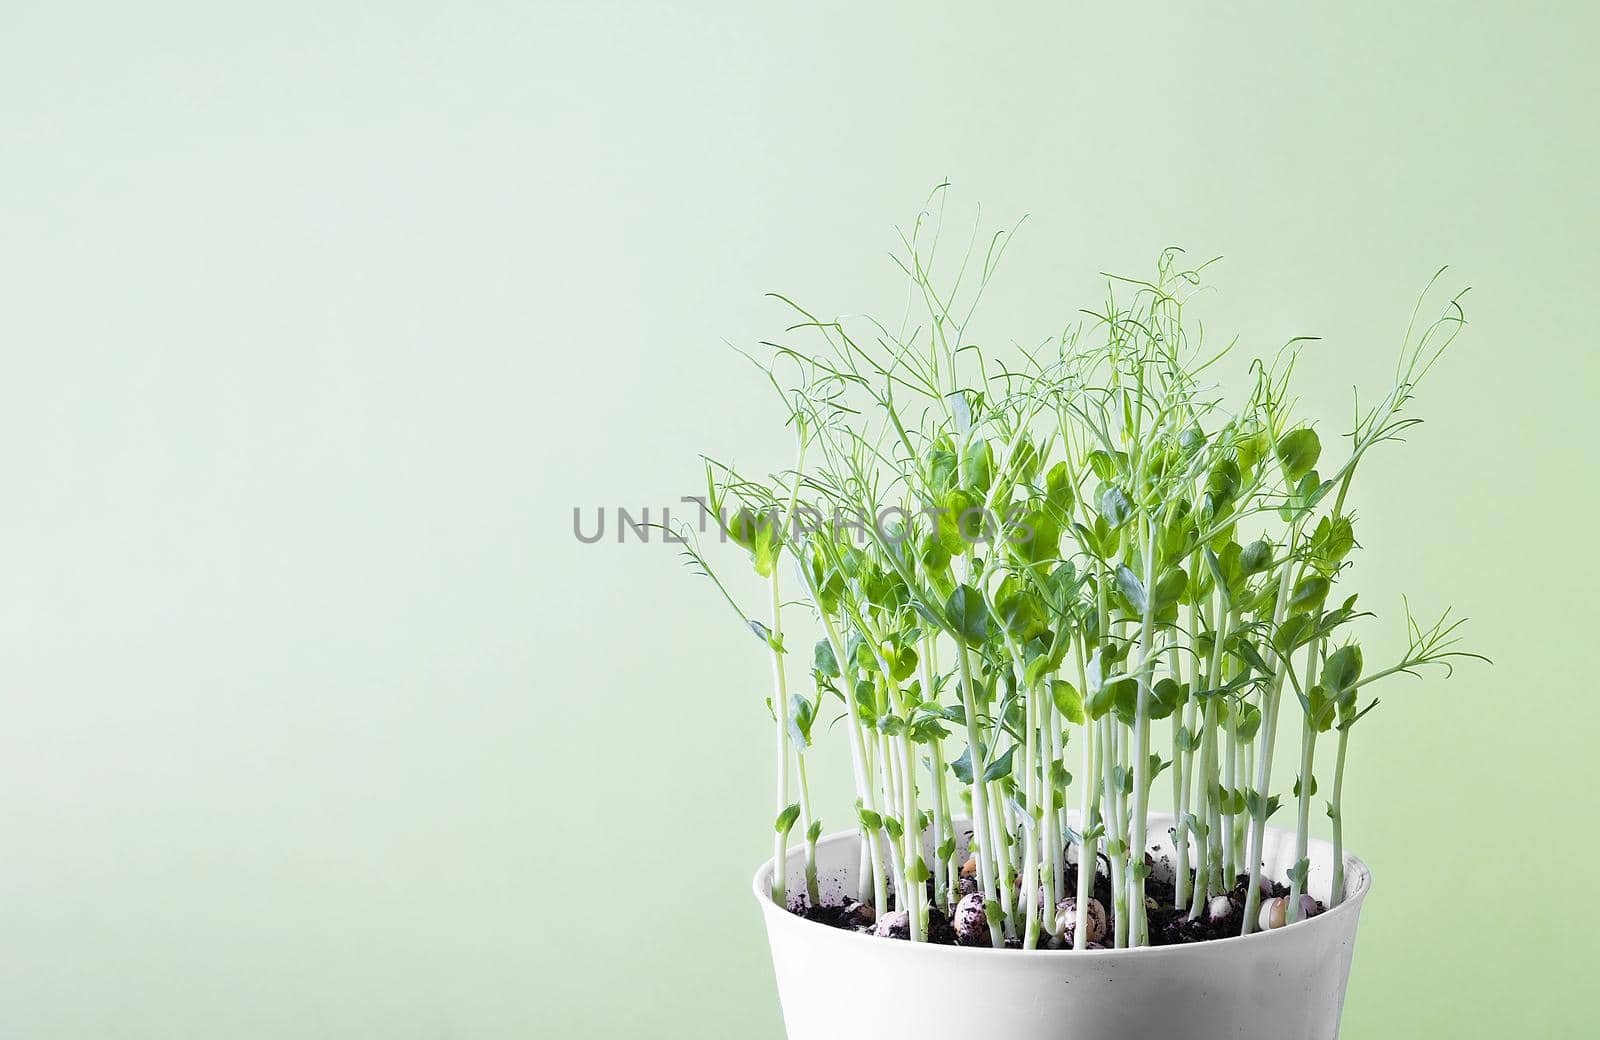 Green pea microgreen sprouts in a white flower pot on a light green background. Healthy healthy food, vegetarianism. Selective focus.